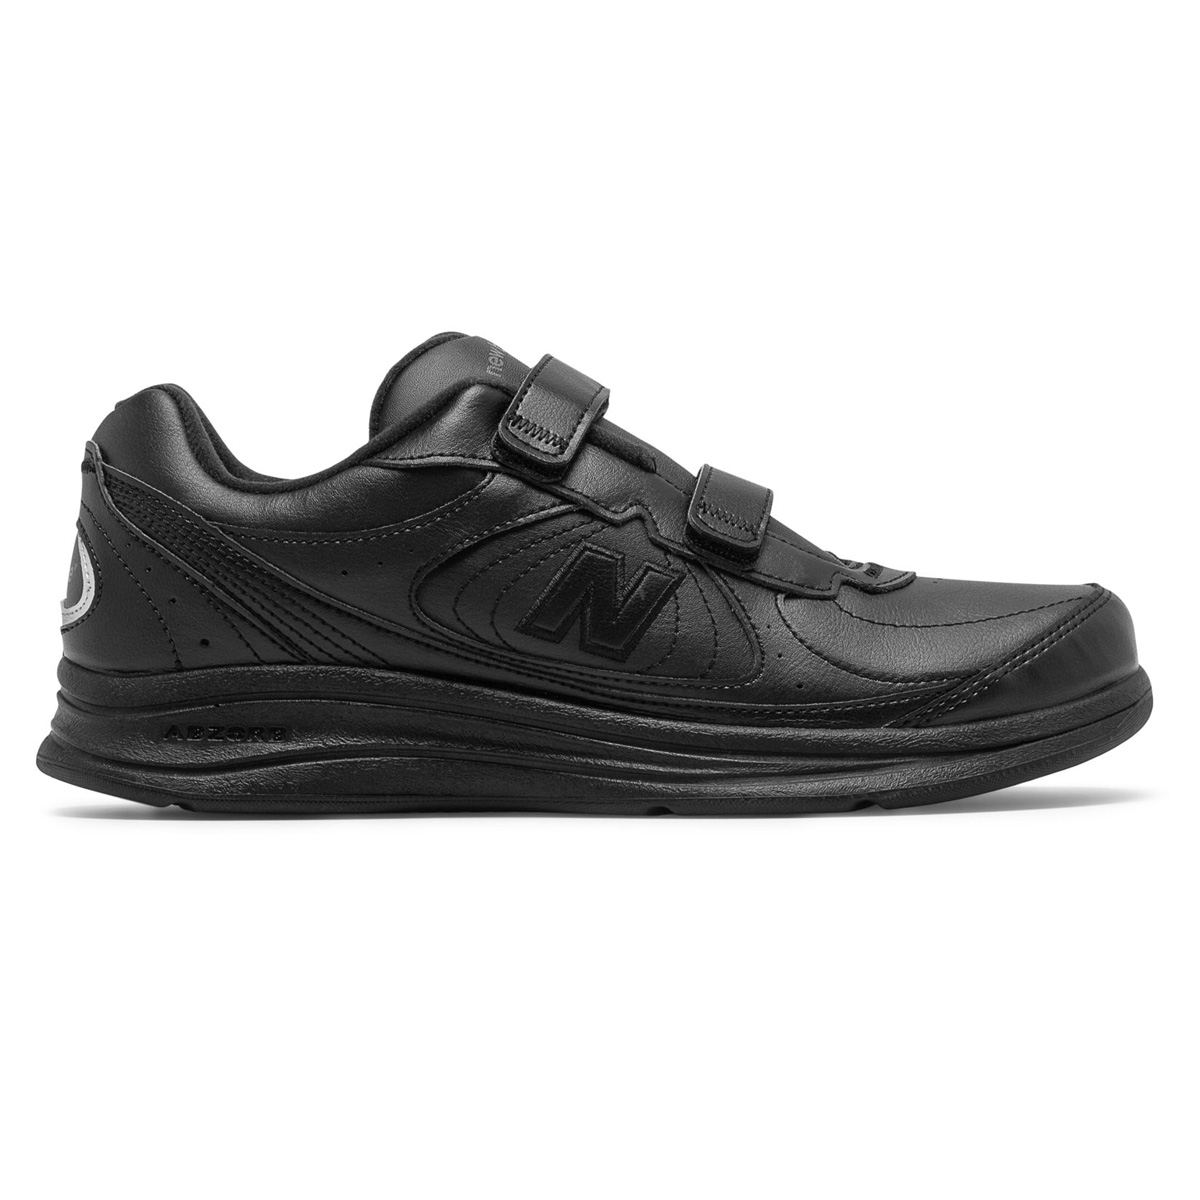 Tennis Shoes for Men - New Balance